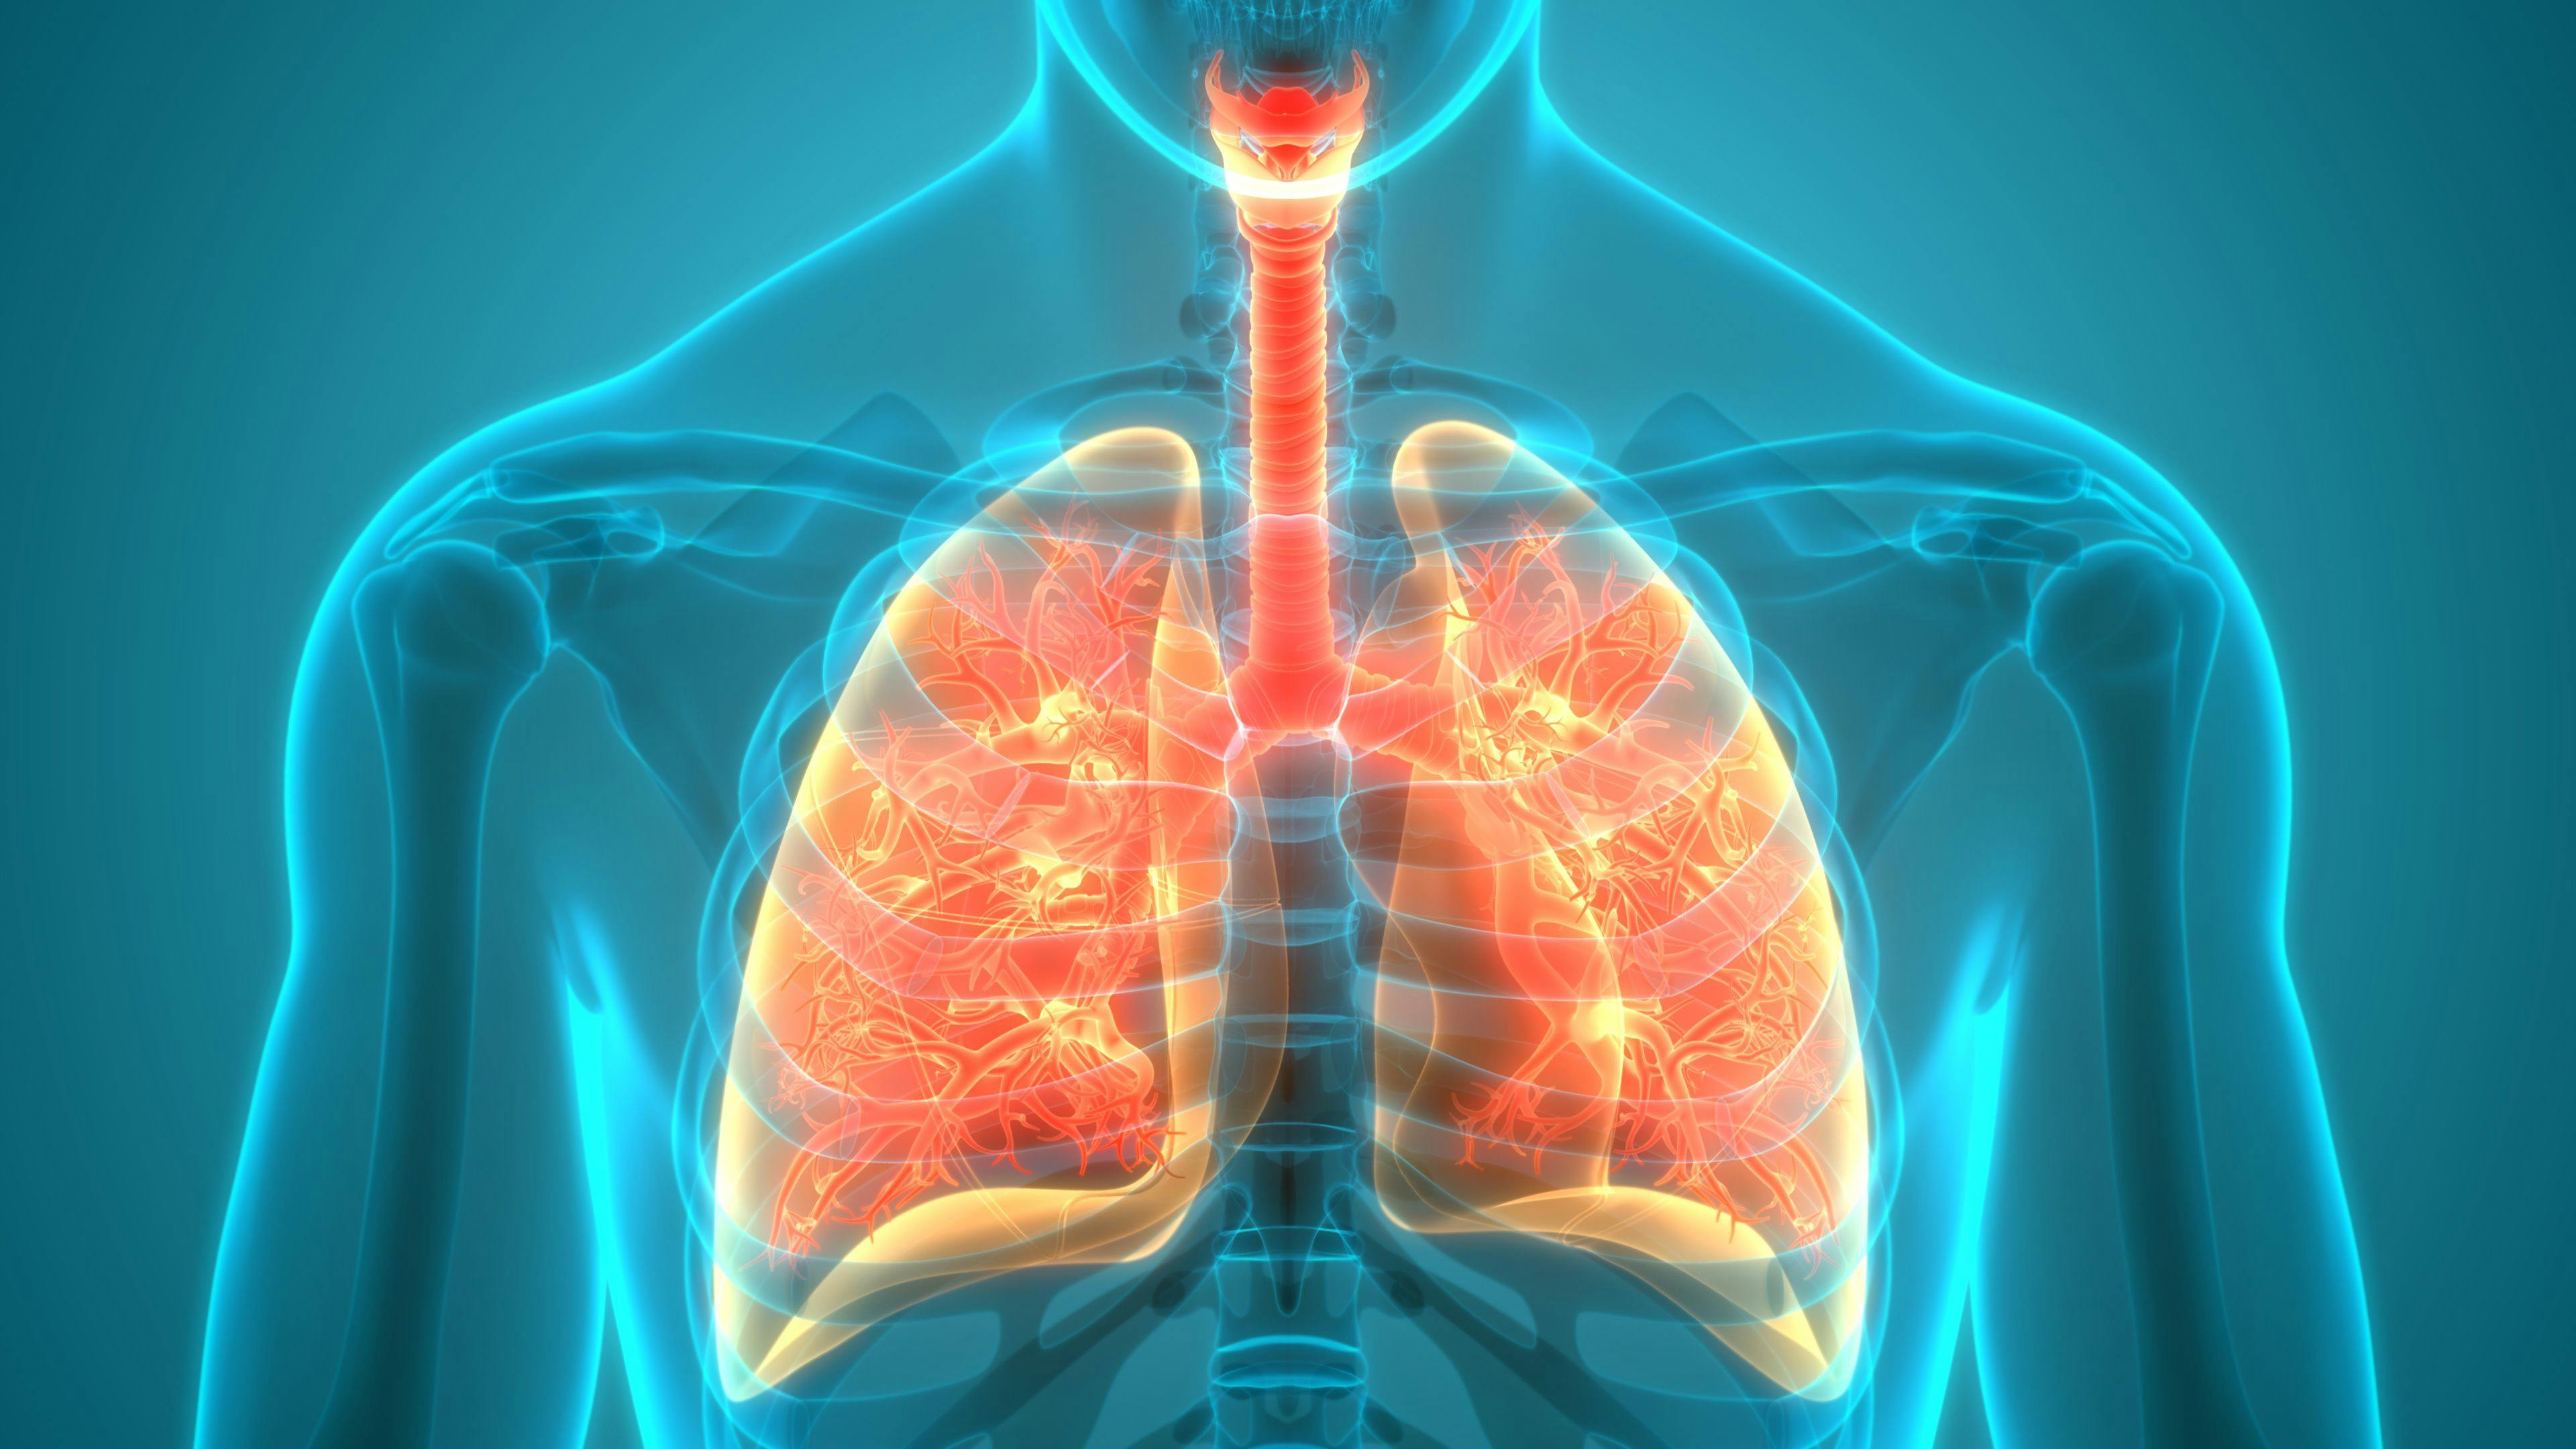 NIH Awards $7.8 Million for Antibiotic Study of Patients With Emphysema, HIV